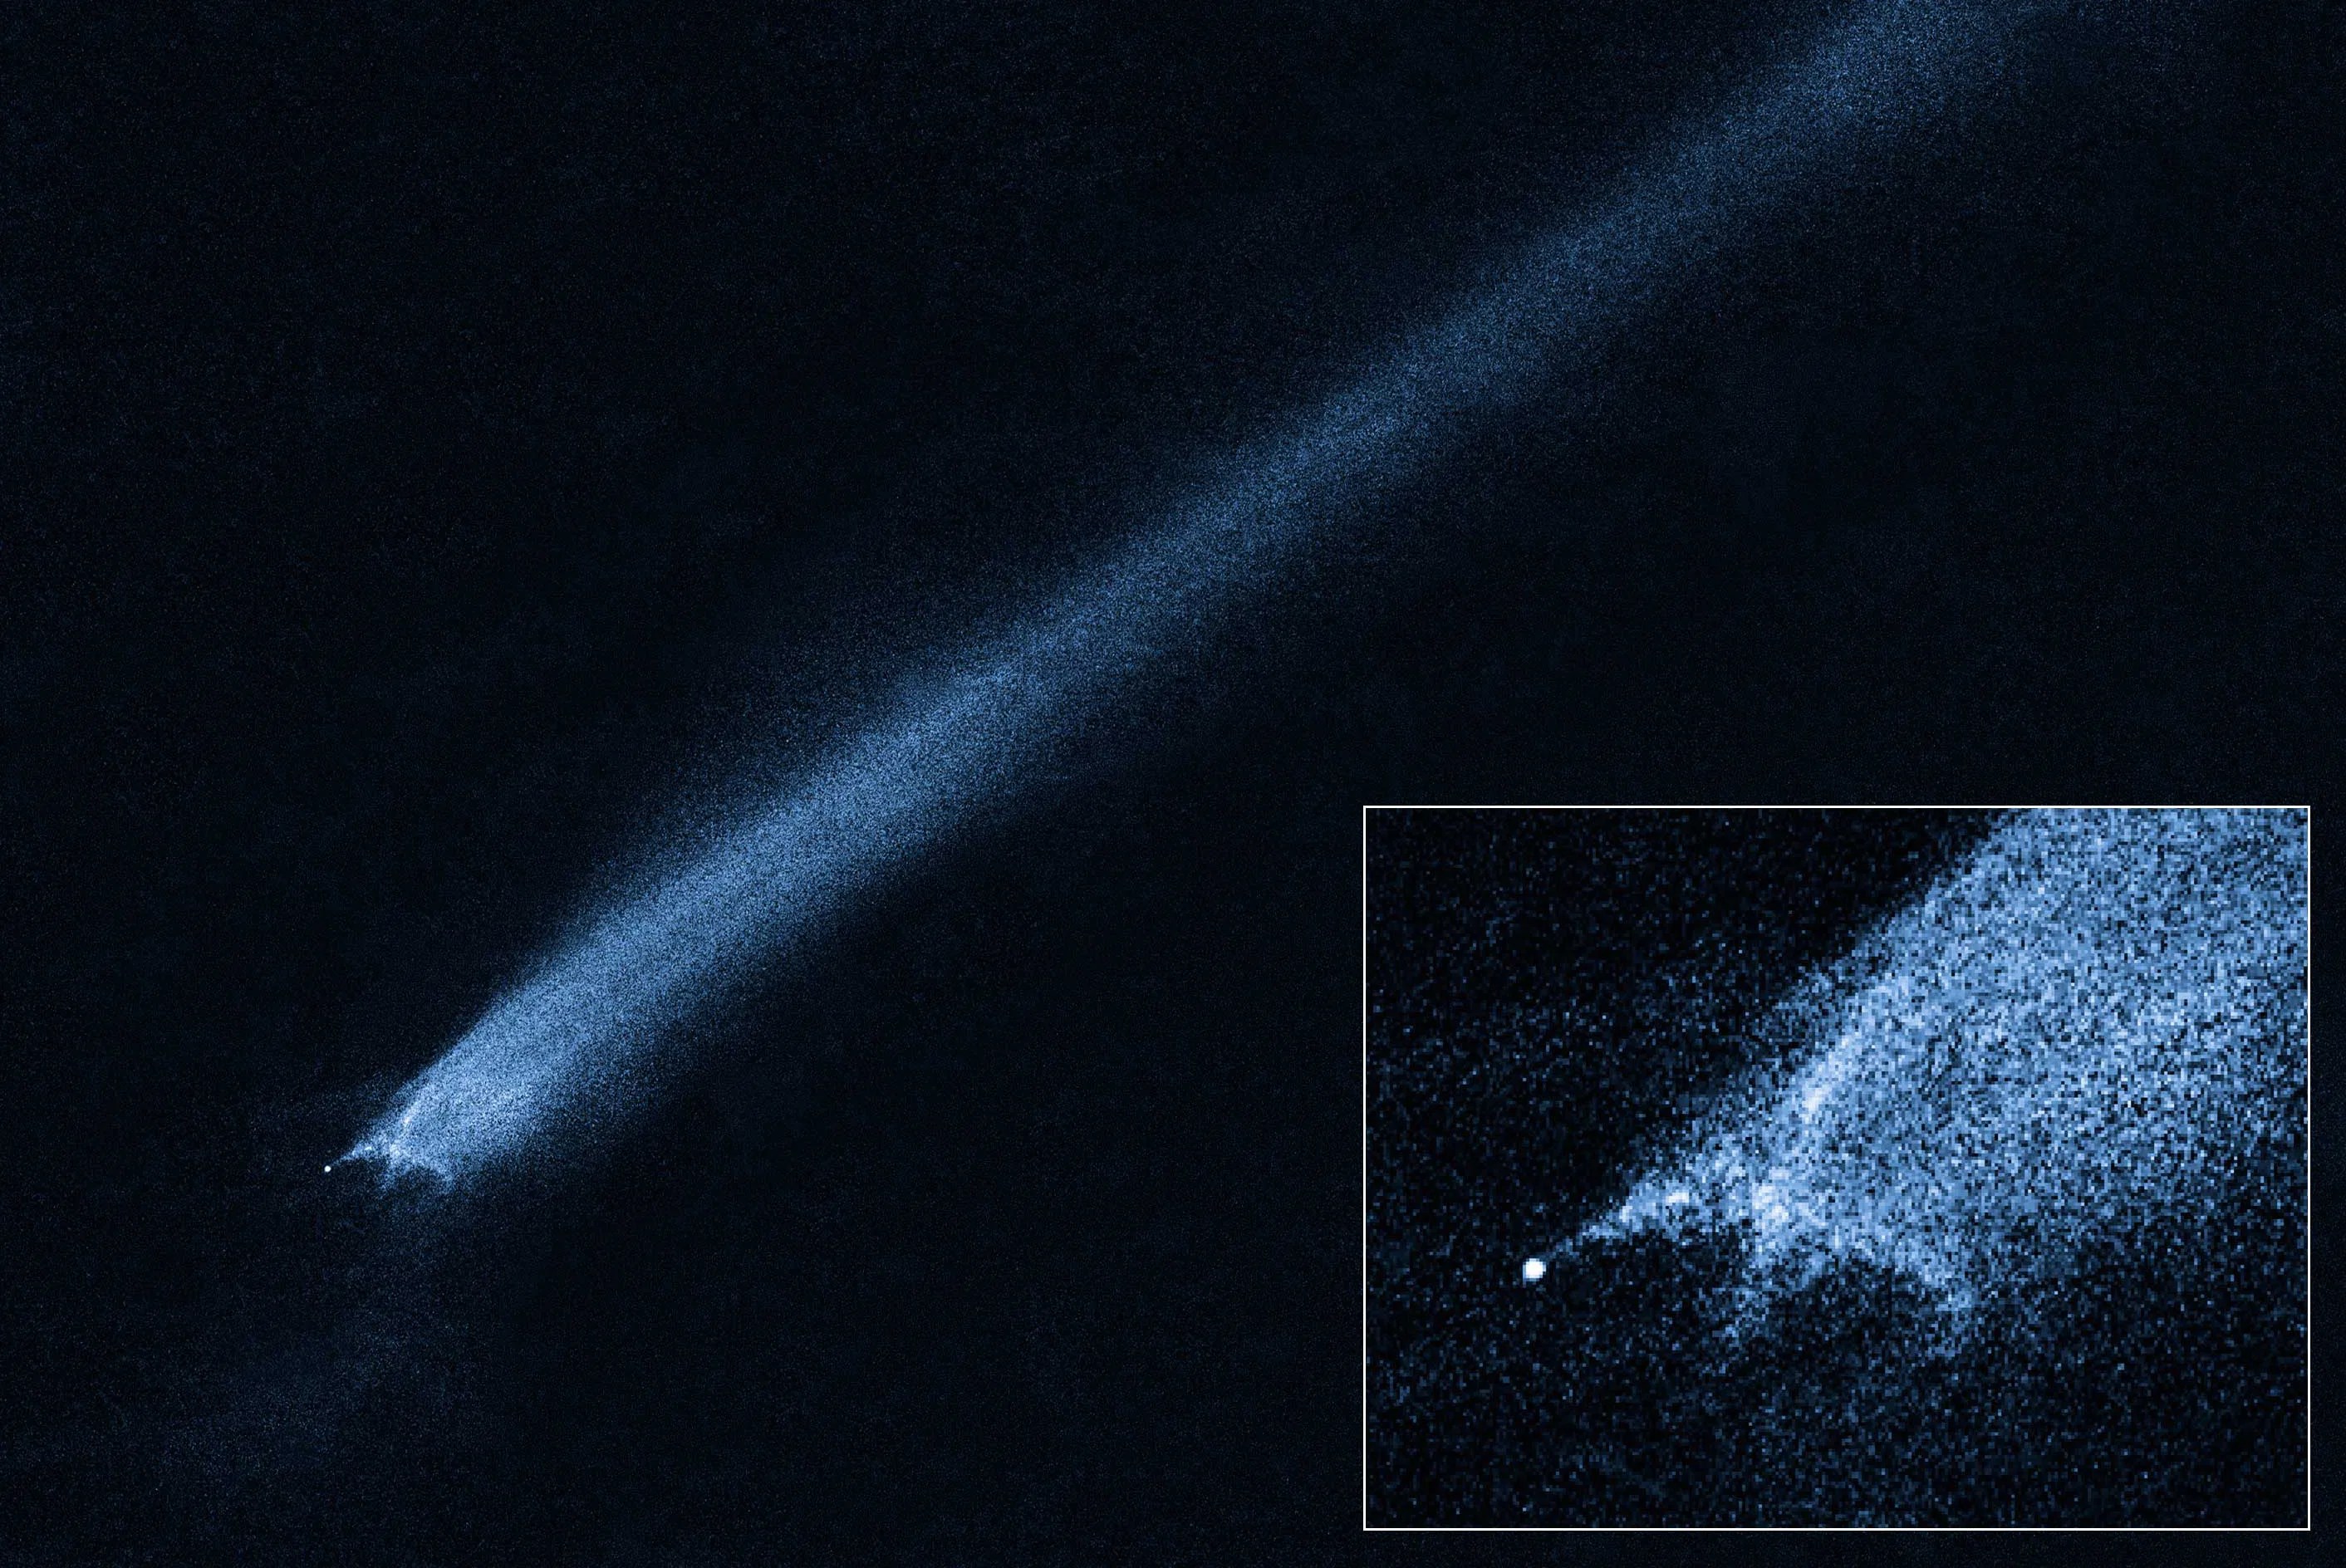 Hubble observations of possible asteroid collision remnants. Streak of blue-white light that begins at lower-left with an X-shape, and extends with a long tail to the upper right. Lower right holds a close-up of the "X."